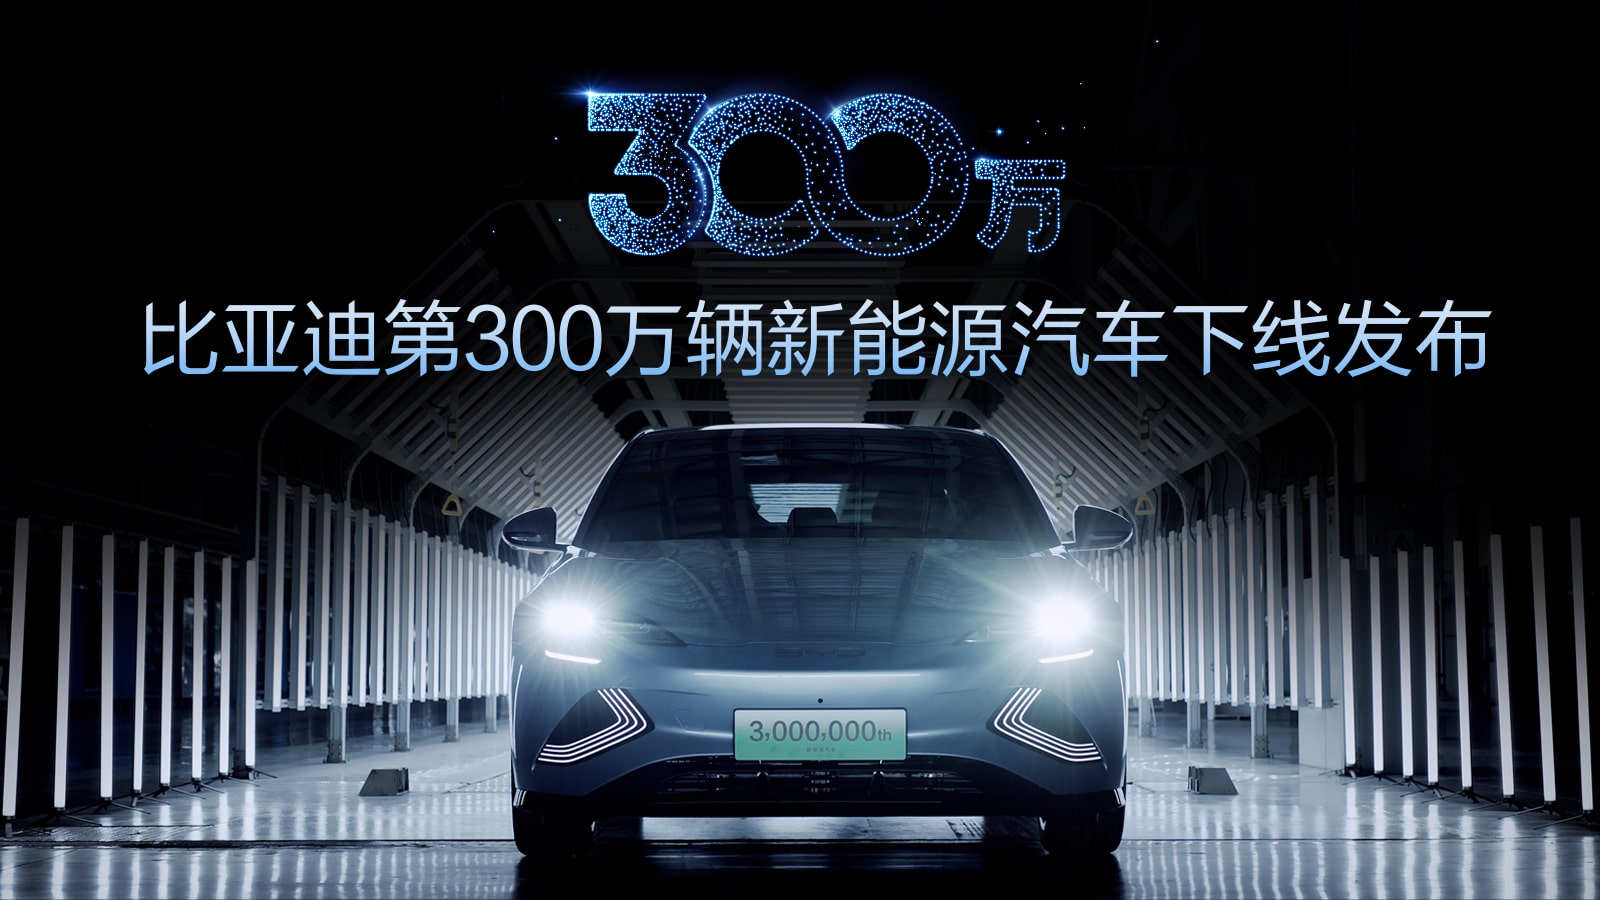 BYD Rolls Off Its 3 Millionth New Energy Vehicle and Debuts A New Passenger Car Brand Matrix